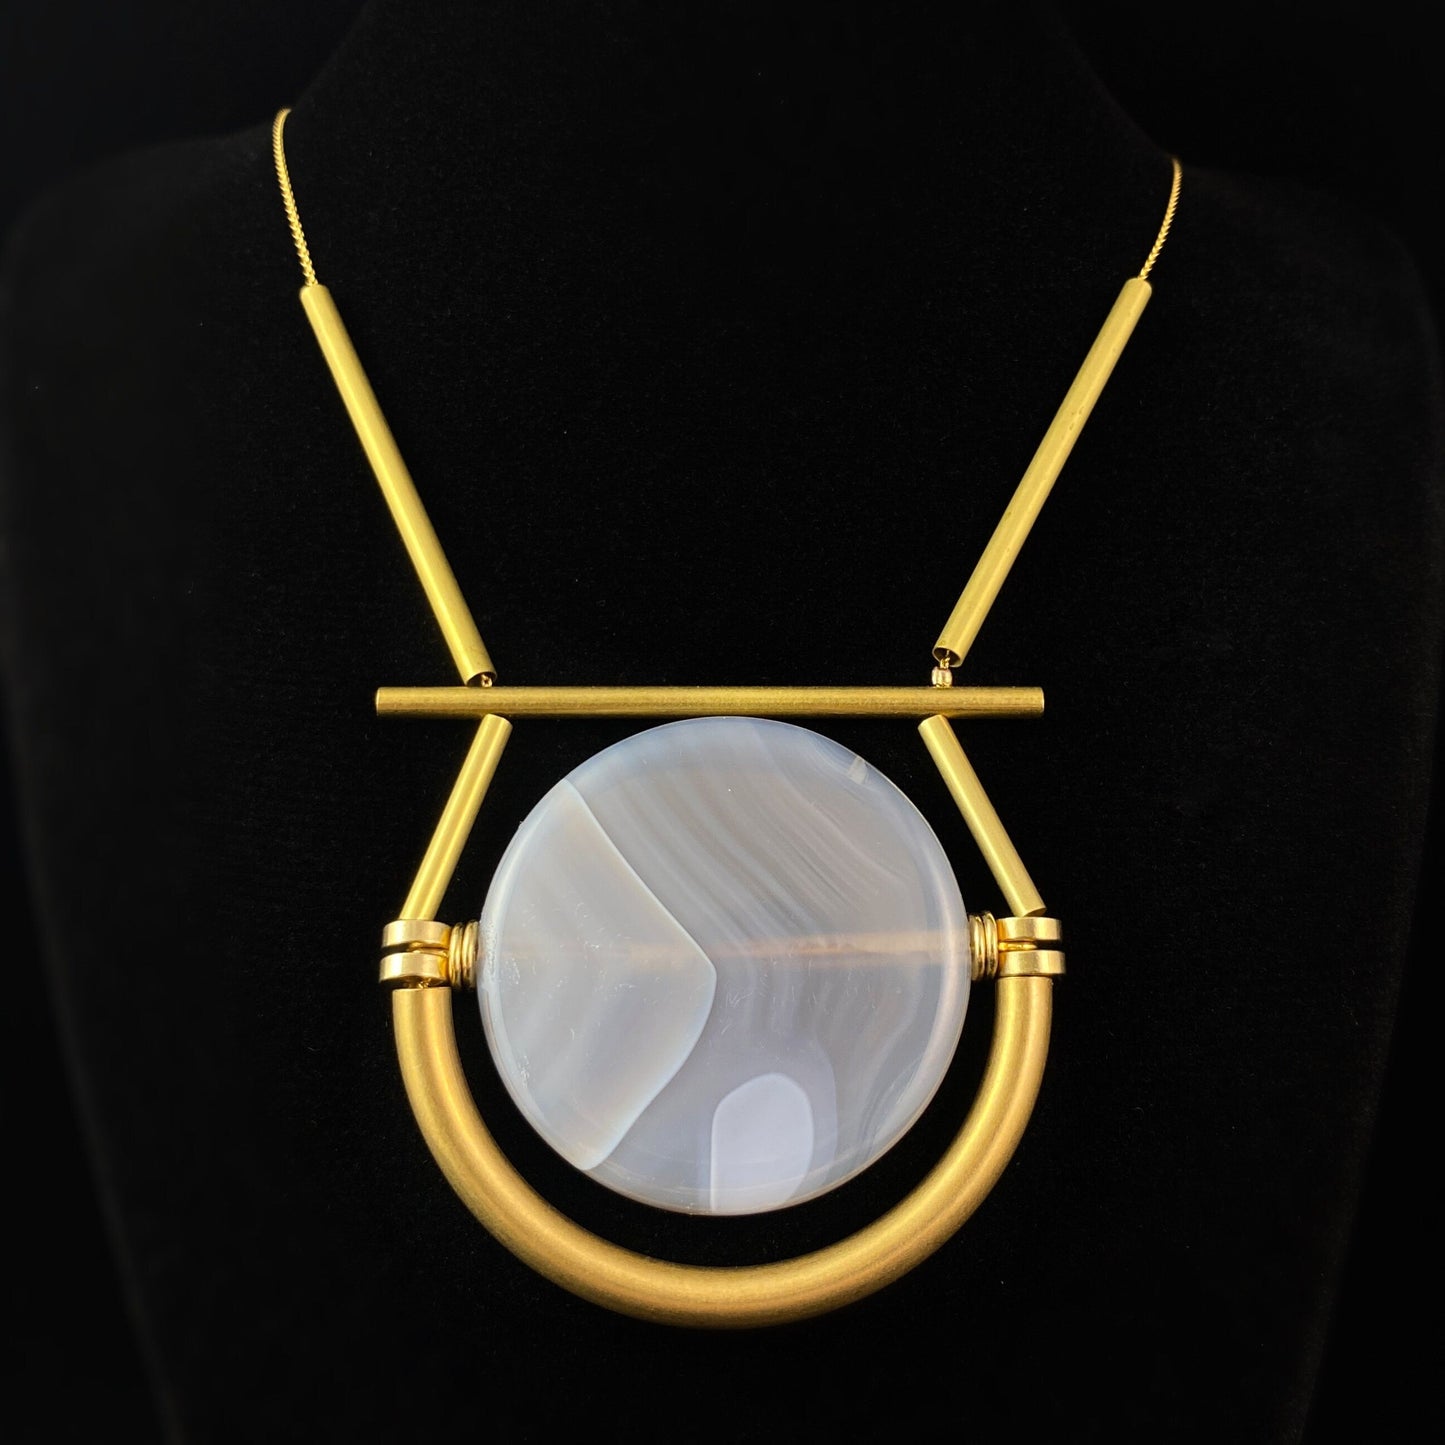 Gray Agate Art Deco Necklace with 18kt Gold Plated Chain and Gold Beading - David Aubrey Jewelry